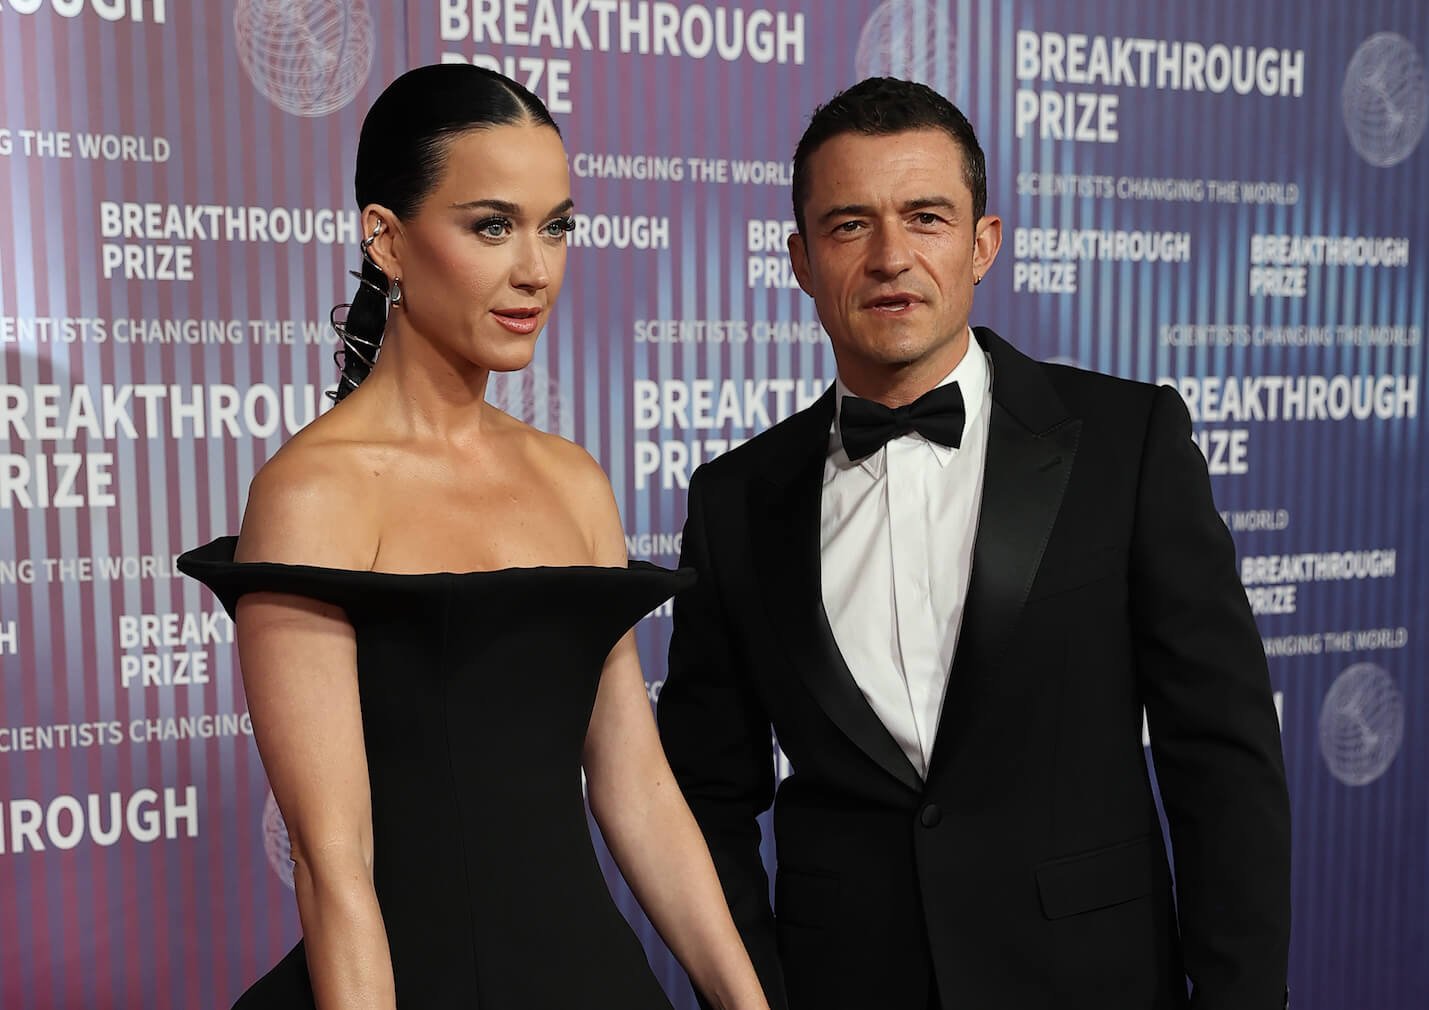 Katy Perry and Orlando Bloom holding hands at the Breakthrough Prize Awards. Perry is wearing a black dress and Bloom is wearing a tuxedo.